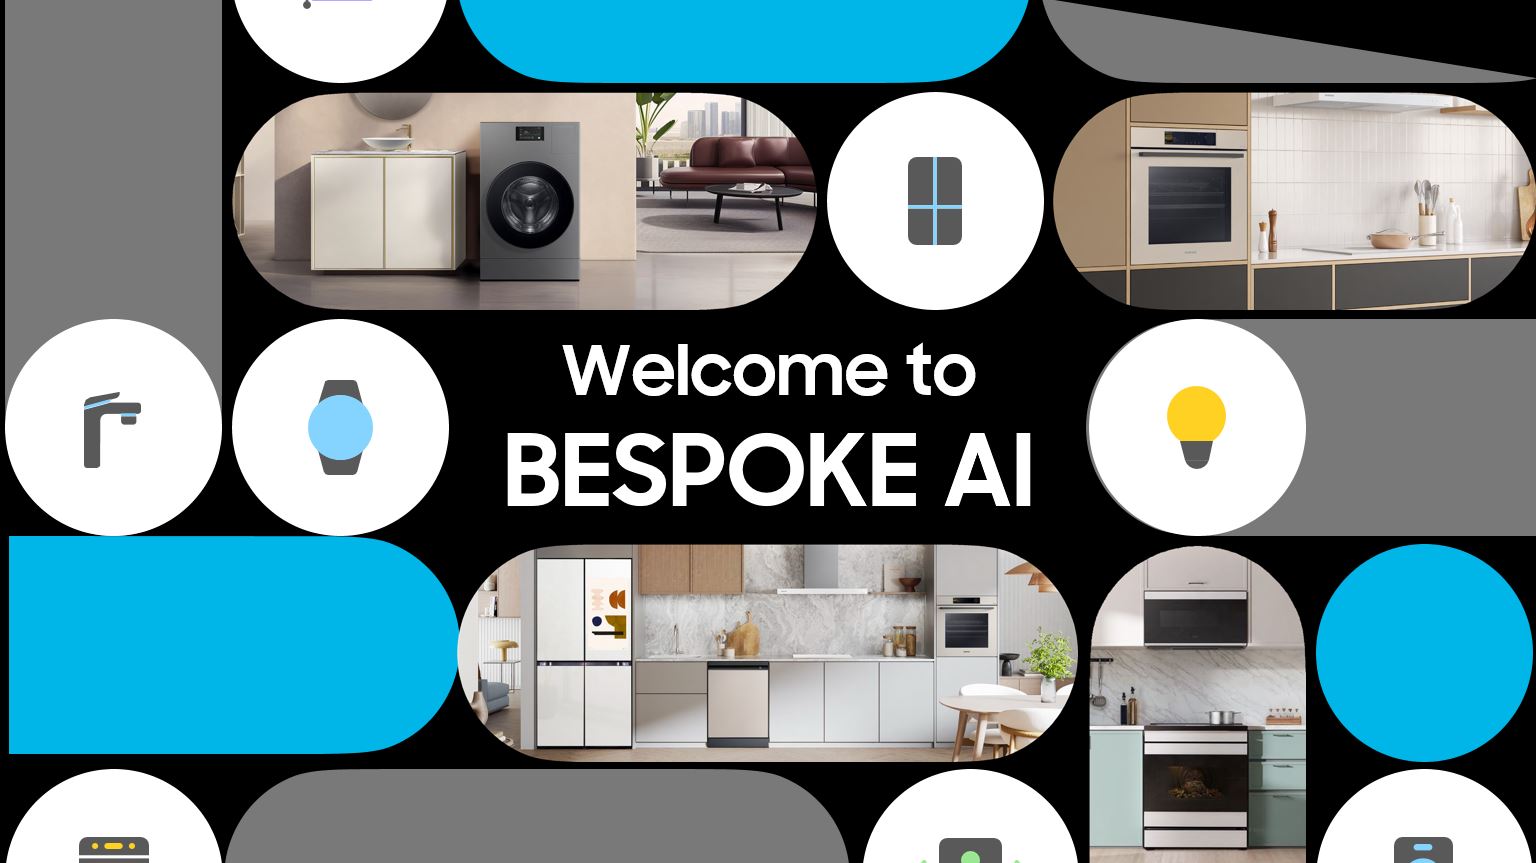 samsung introduces latest home appliance lineup featuring enhanced connectivity and ai capabilities at the ‘welcome to bespoke ai’ global launch event